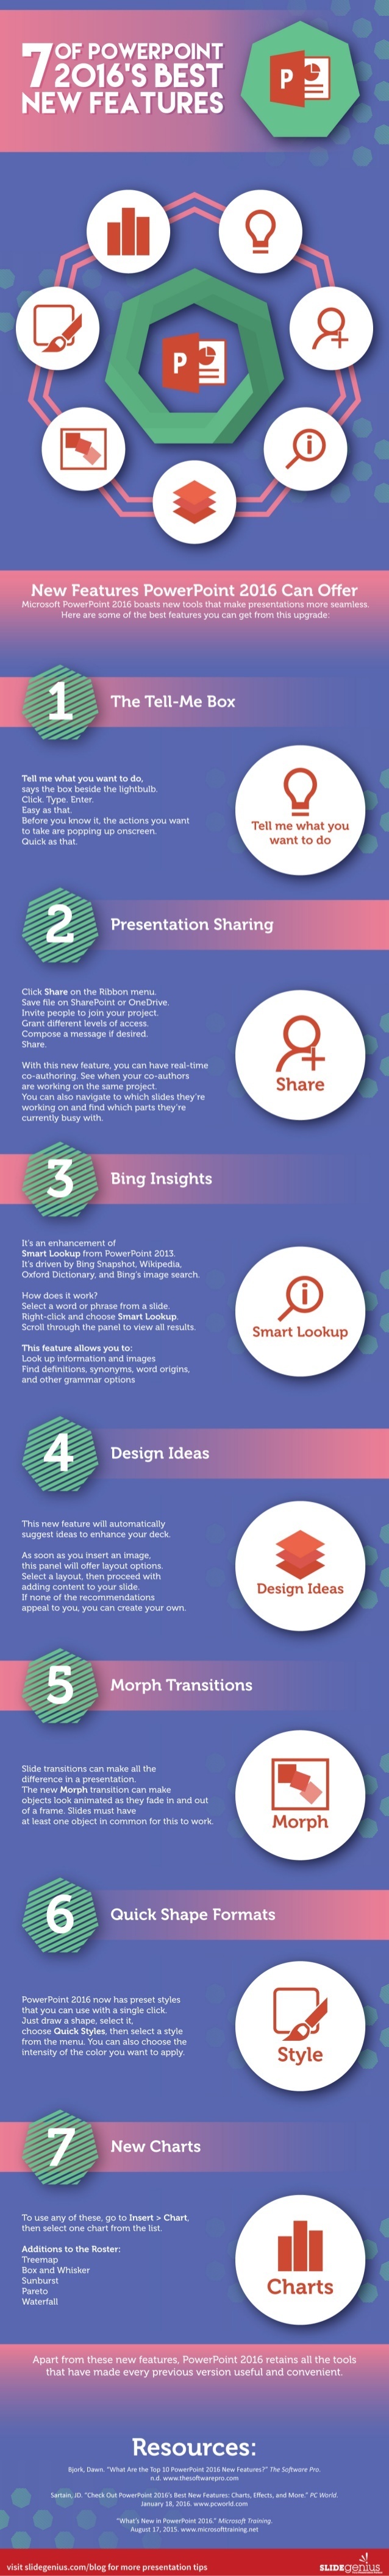 PowerPoint 2016 Best New Features Infographic